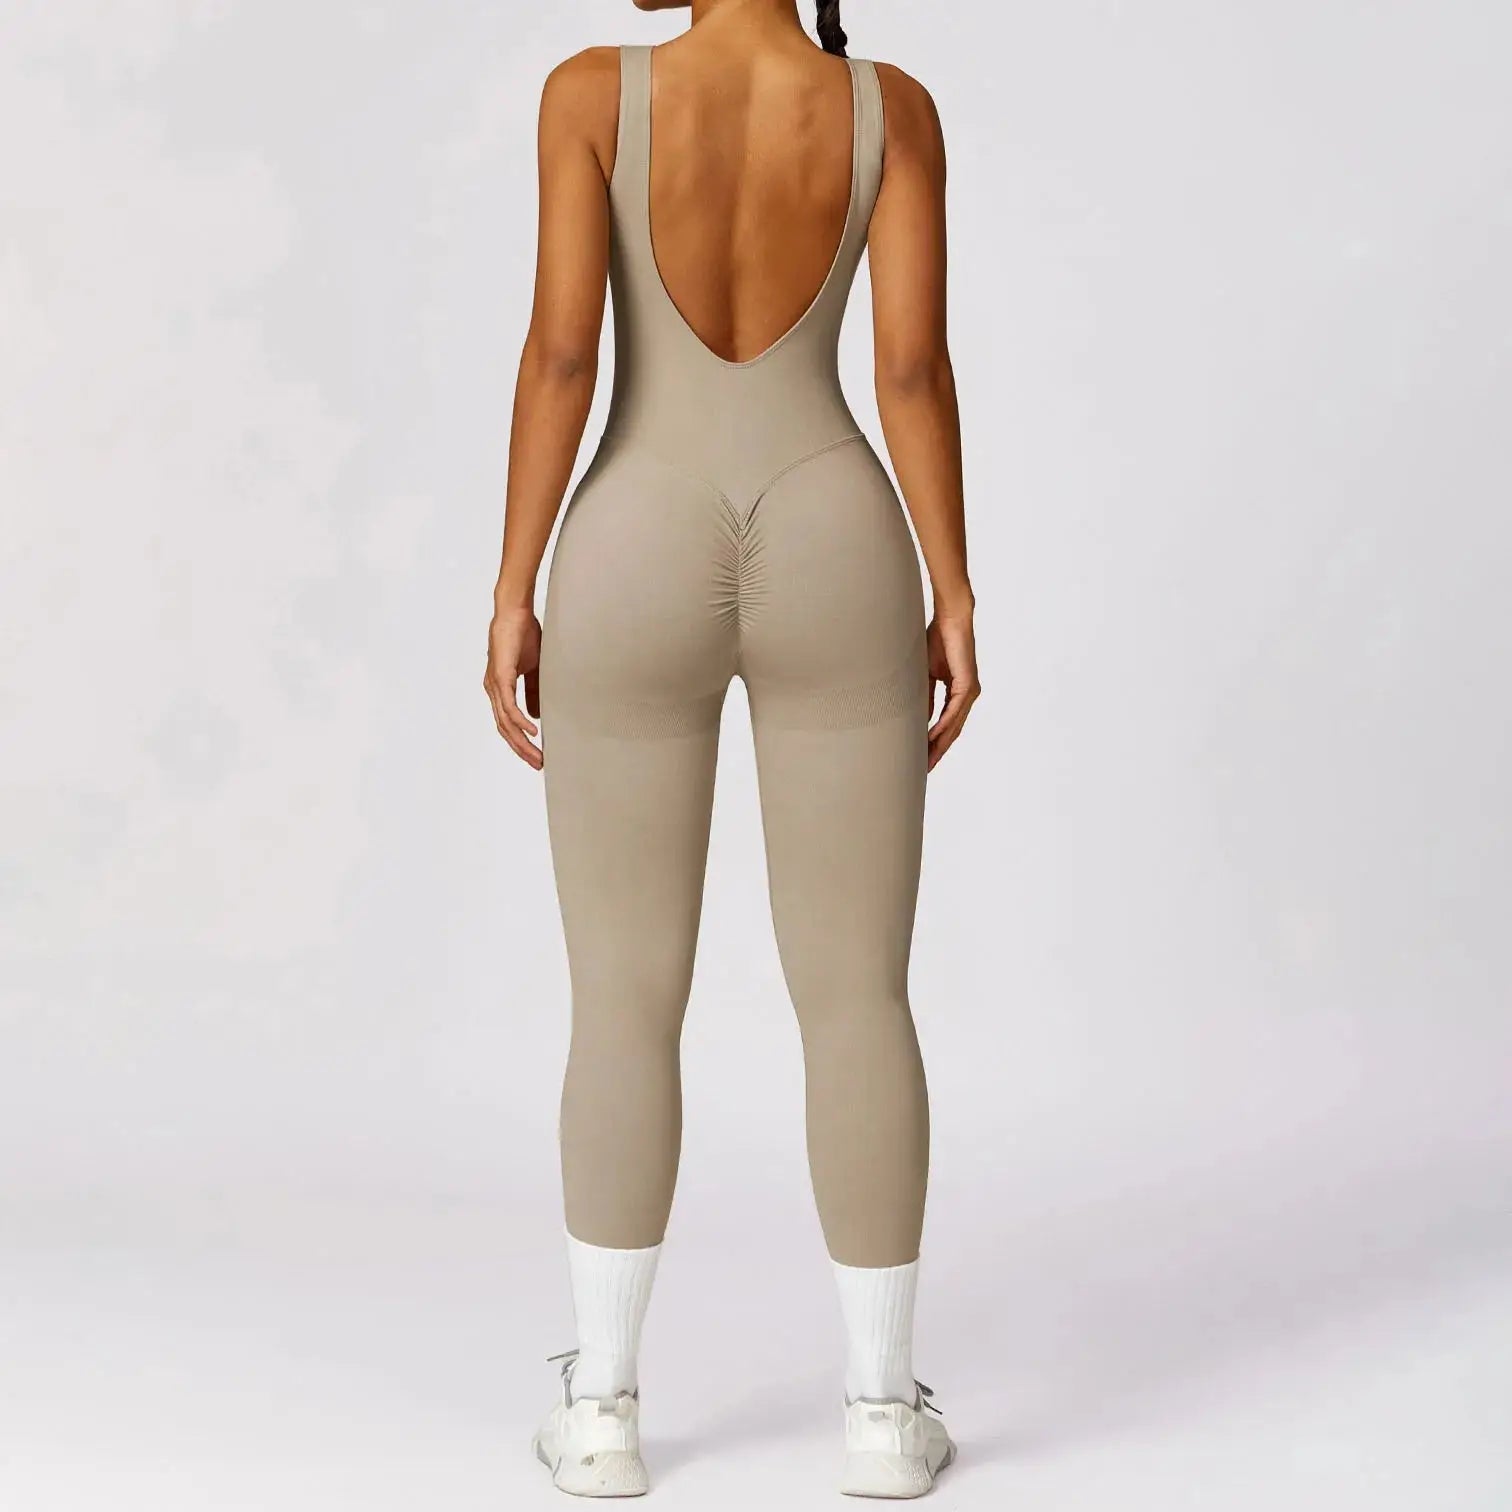 YIYI V Back Scrunch Butt High Stretchy Gym Leggings Jumpsuits Girls High Impact Bra Seamless Rompers Sports Jumpsuit For Women